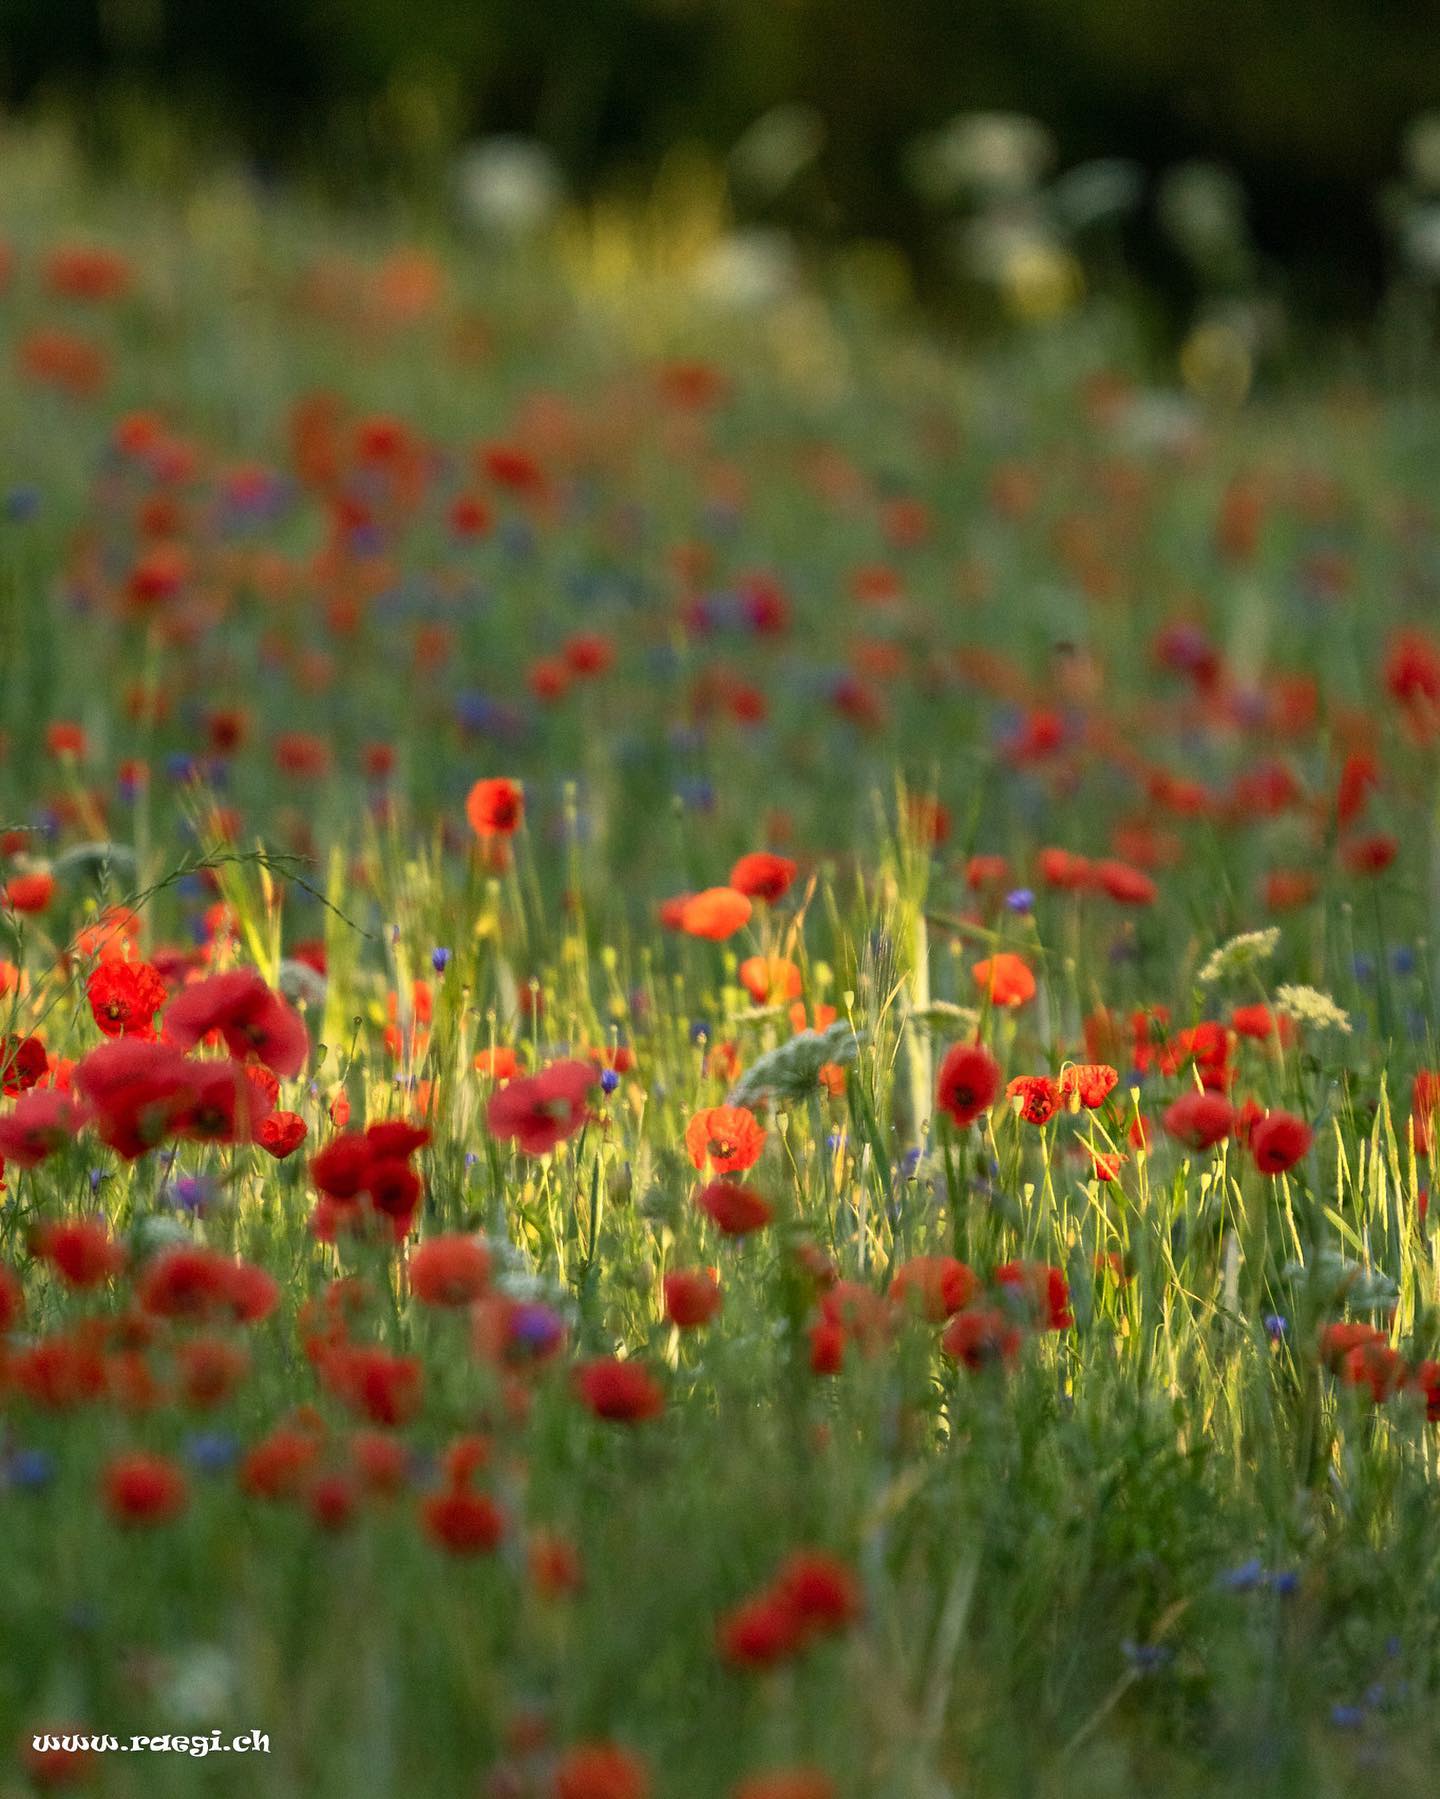 In a field of poppy flowers, I am just another wildflower.
Creating my own identity in a chaos of colours.